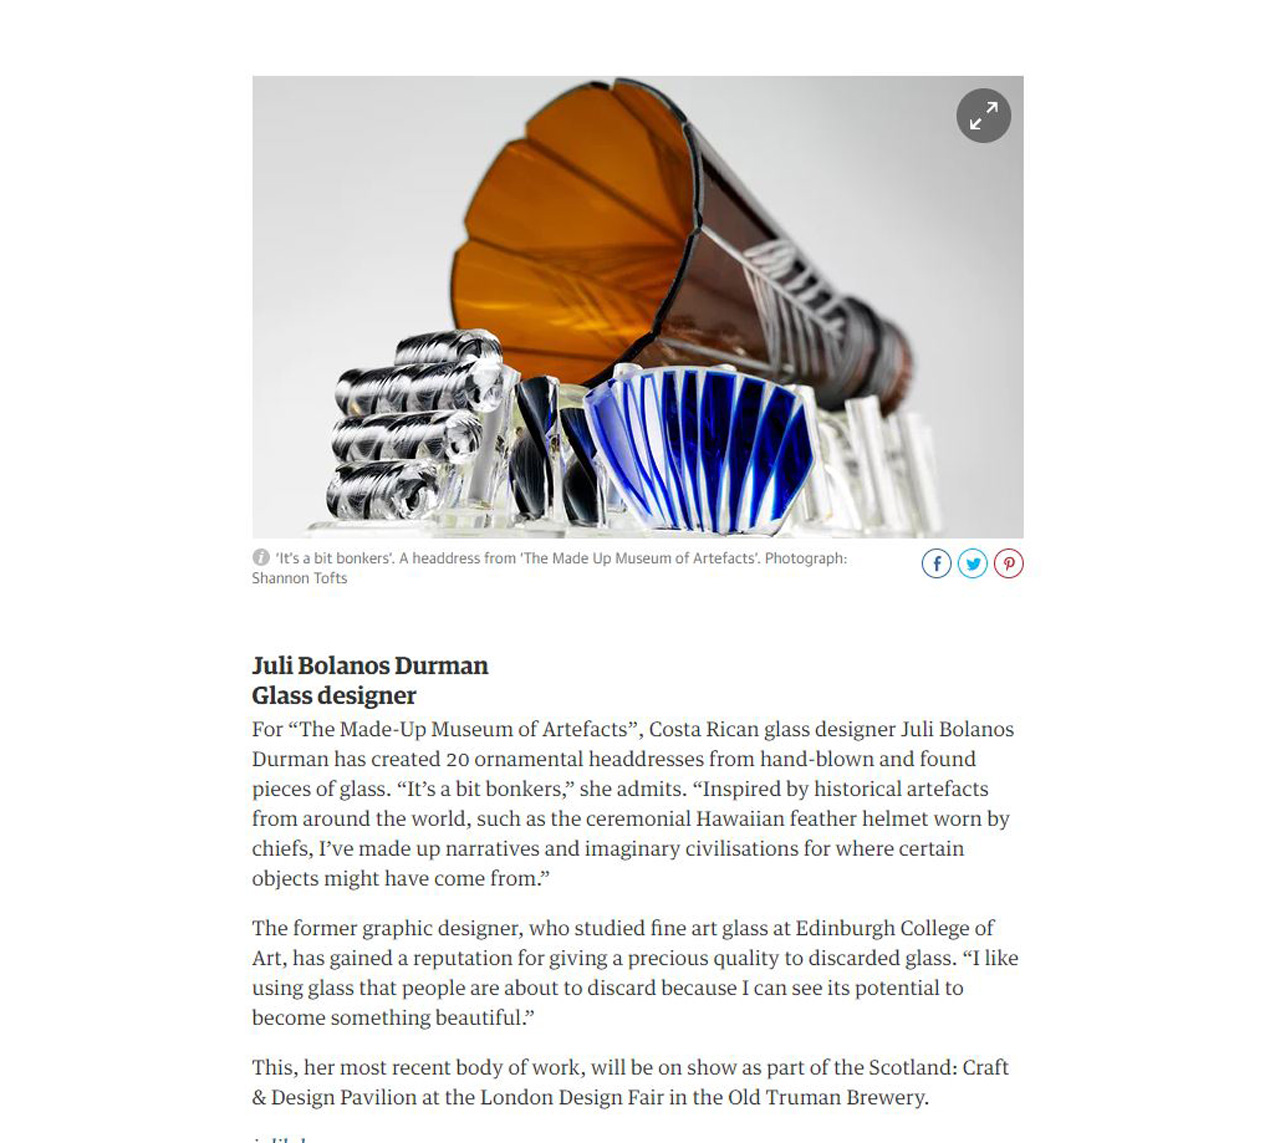 The Guardian: Scotland: Craft & Design - Shannon Tofts